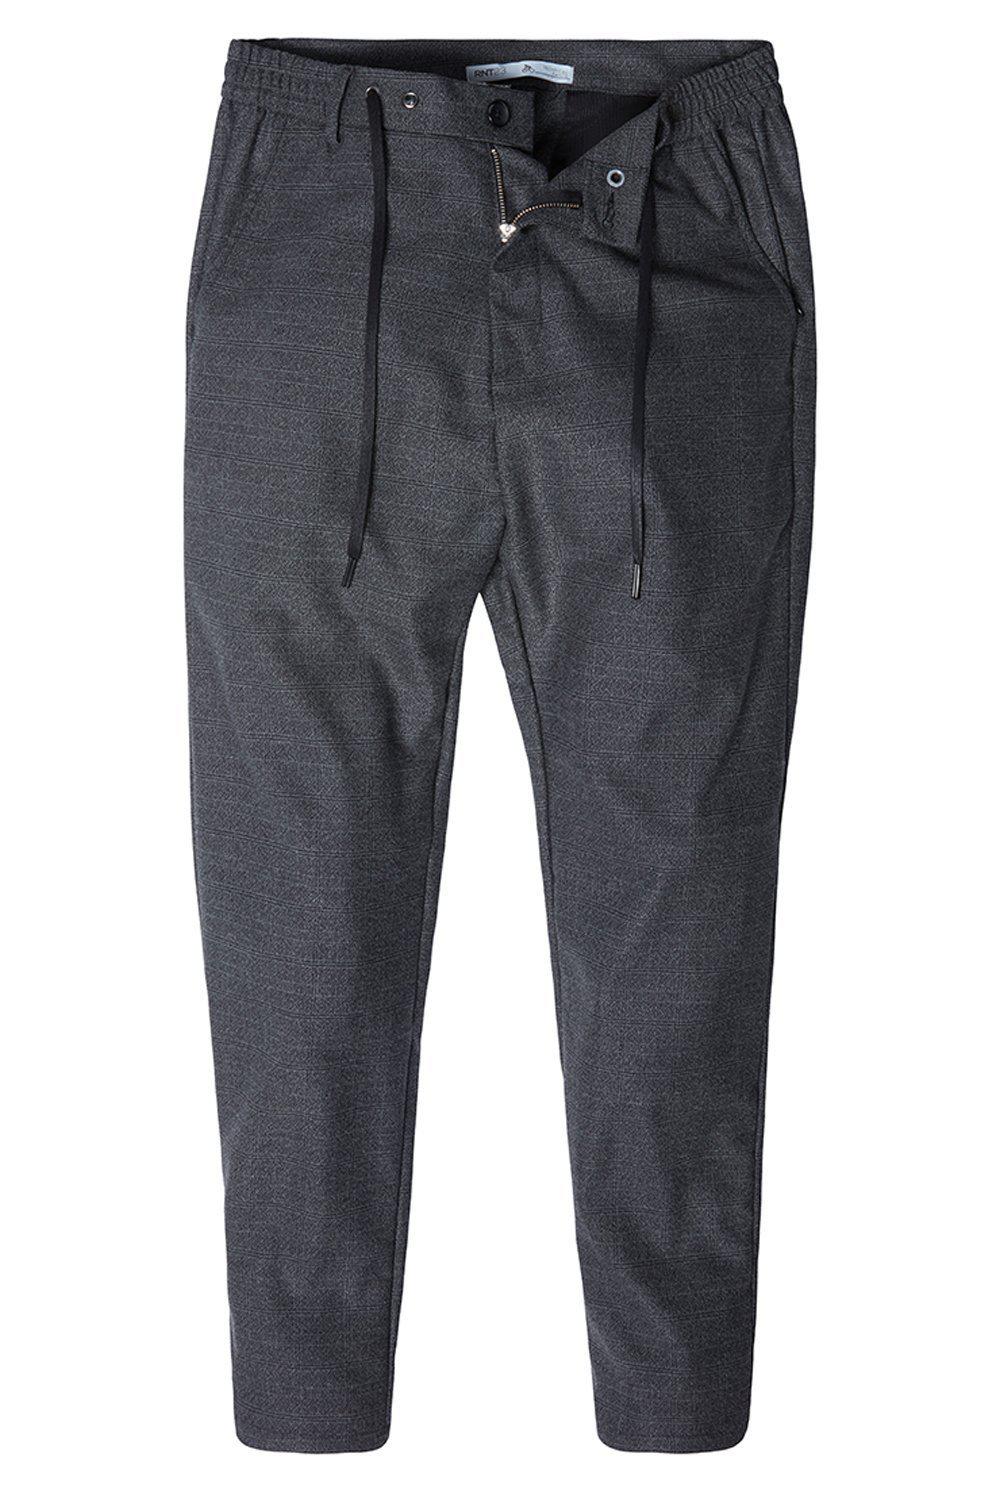 Marled Commuted Trouser - BLACK - Ron Tomson